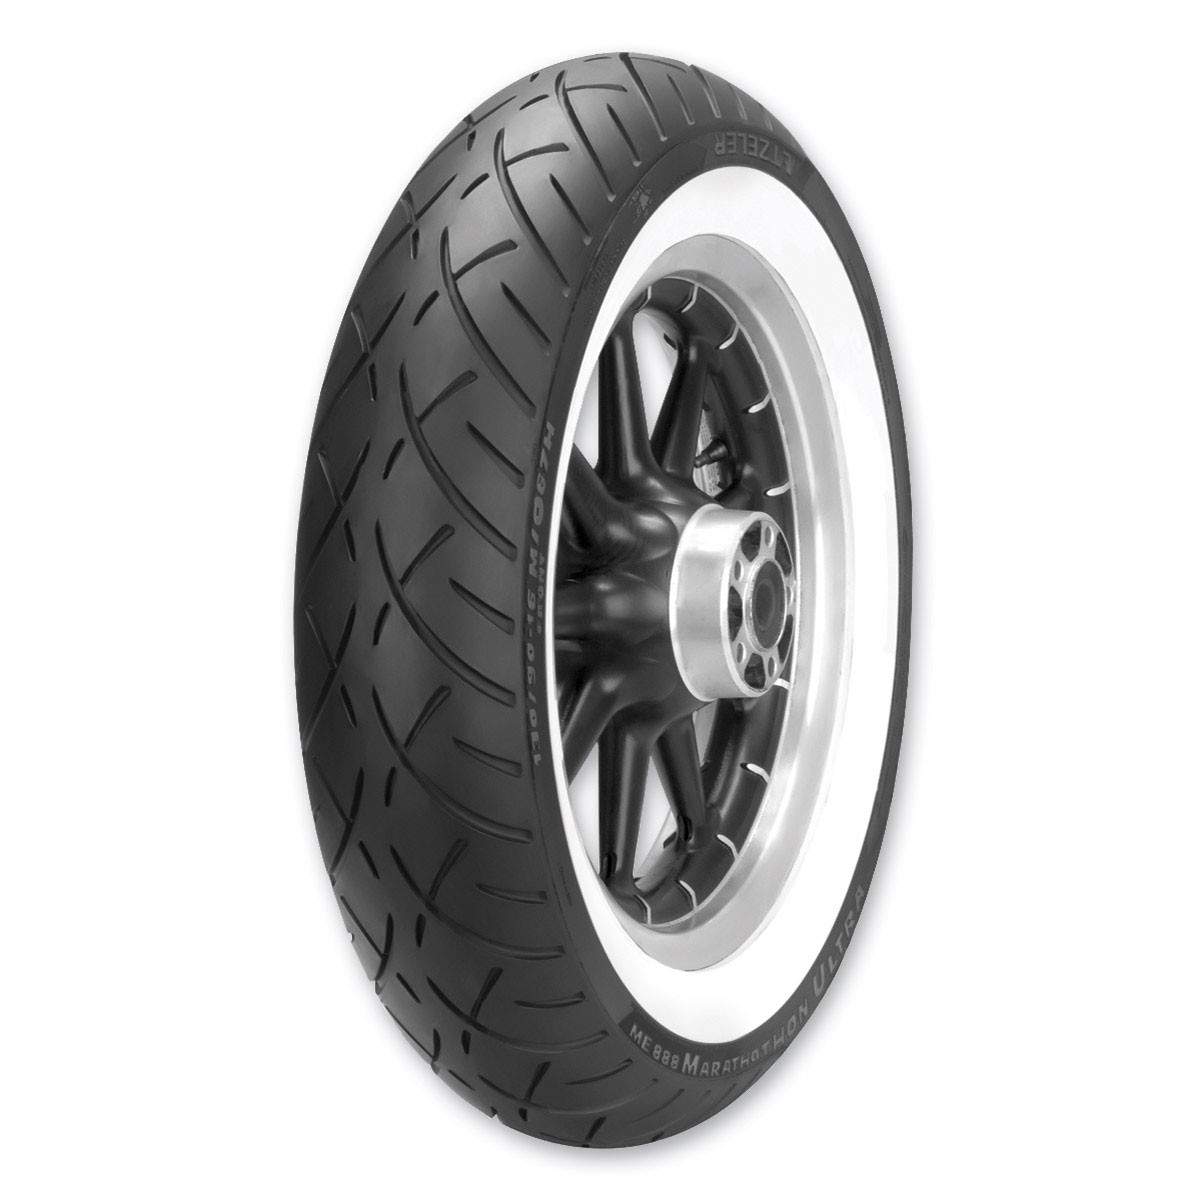 Metzeler ME 888 Wide Whitewall Front Tire | FortNine Canada